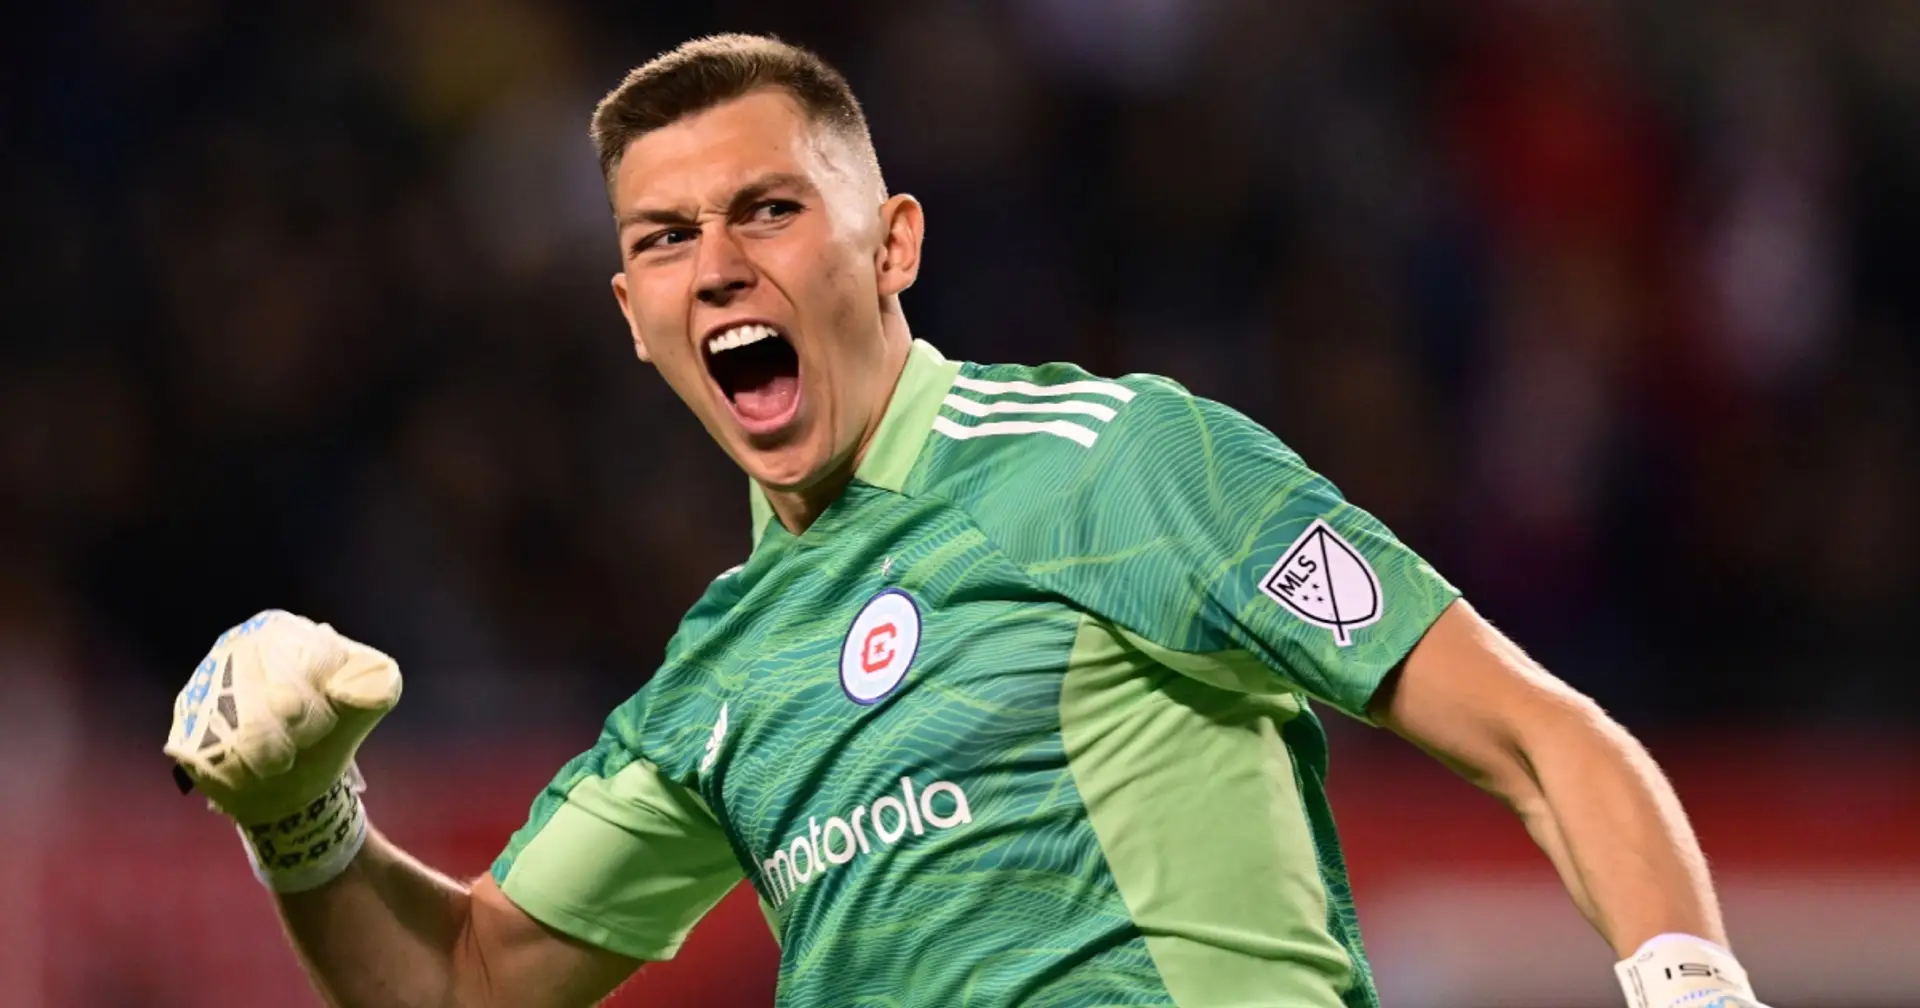 Chelsea 'really close' to beating Real Madrid to 18-year-old keeper Gabriel Slonina - Fabrizio Romano